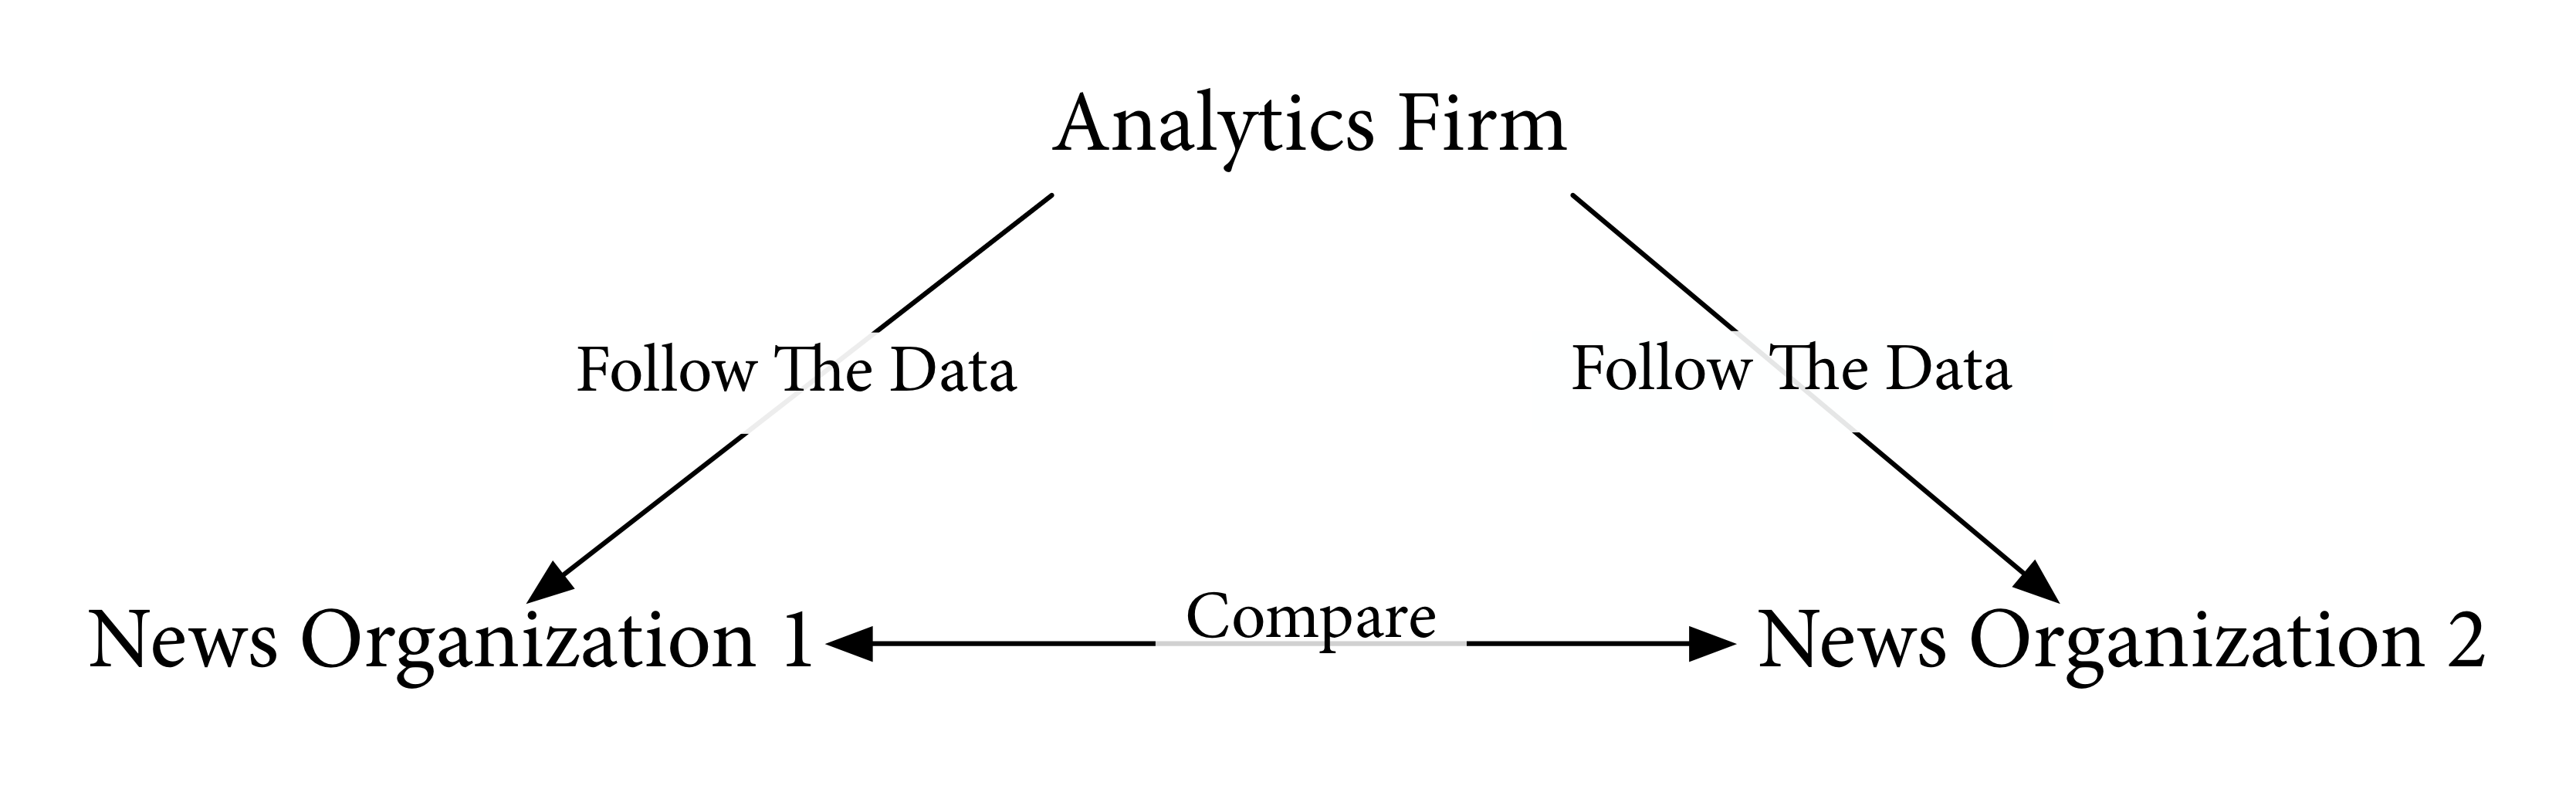 Graphic showing relationship between analytics firms and news organizations.